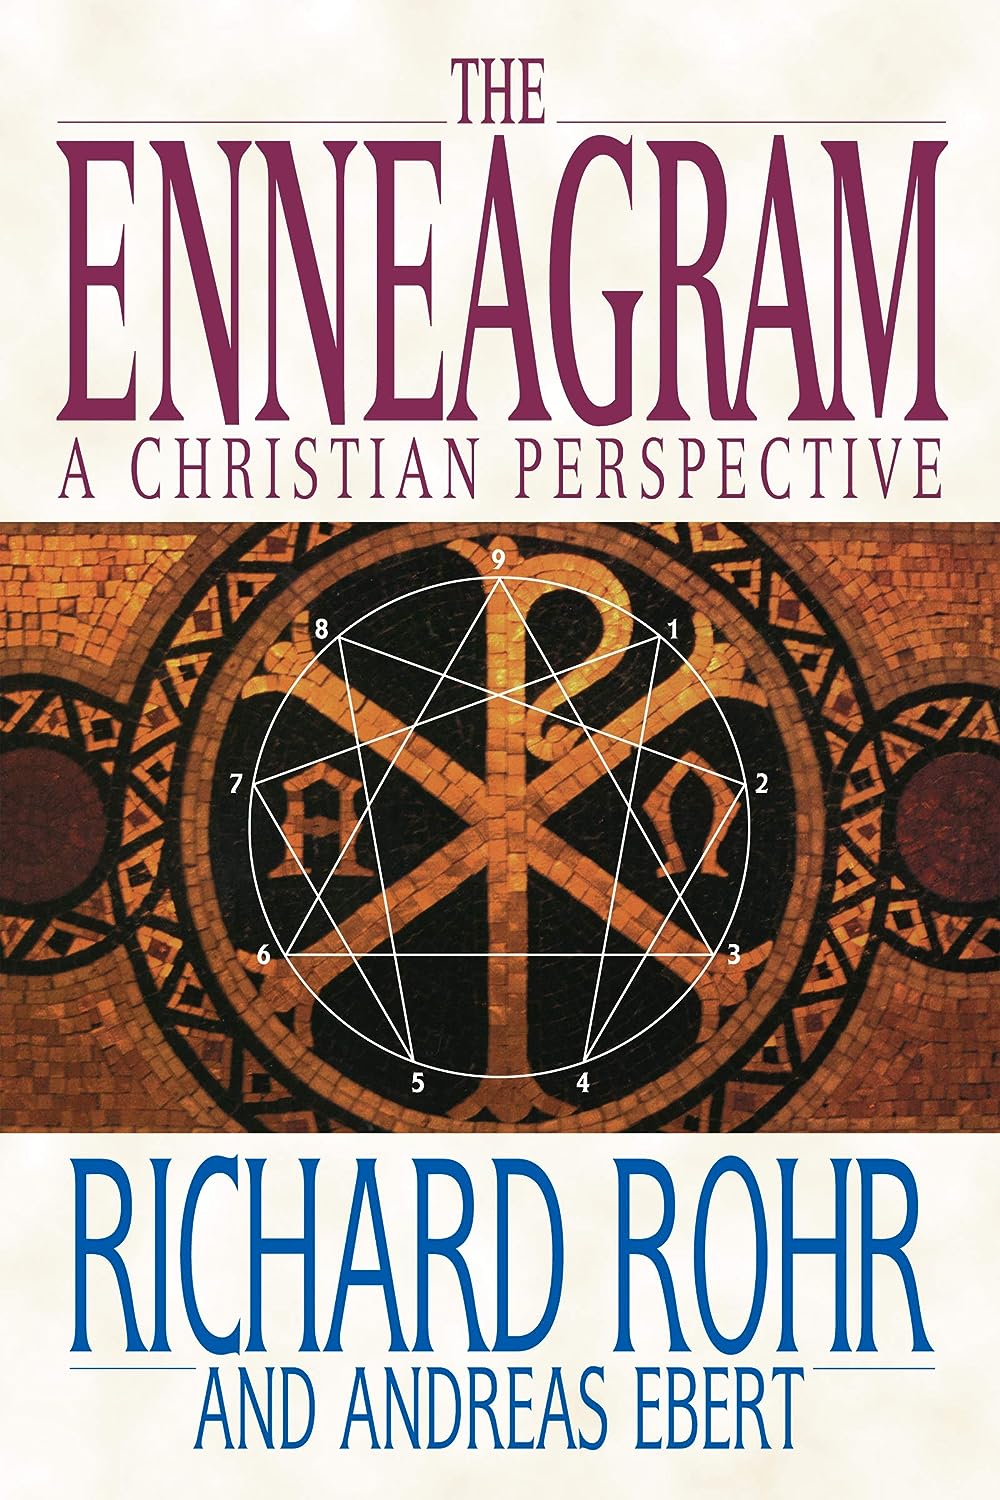 books about enneagram5